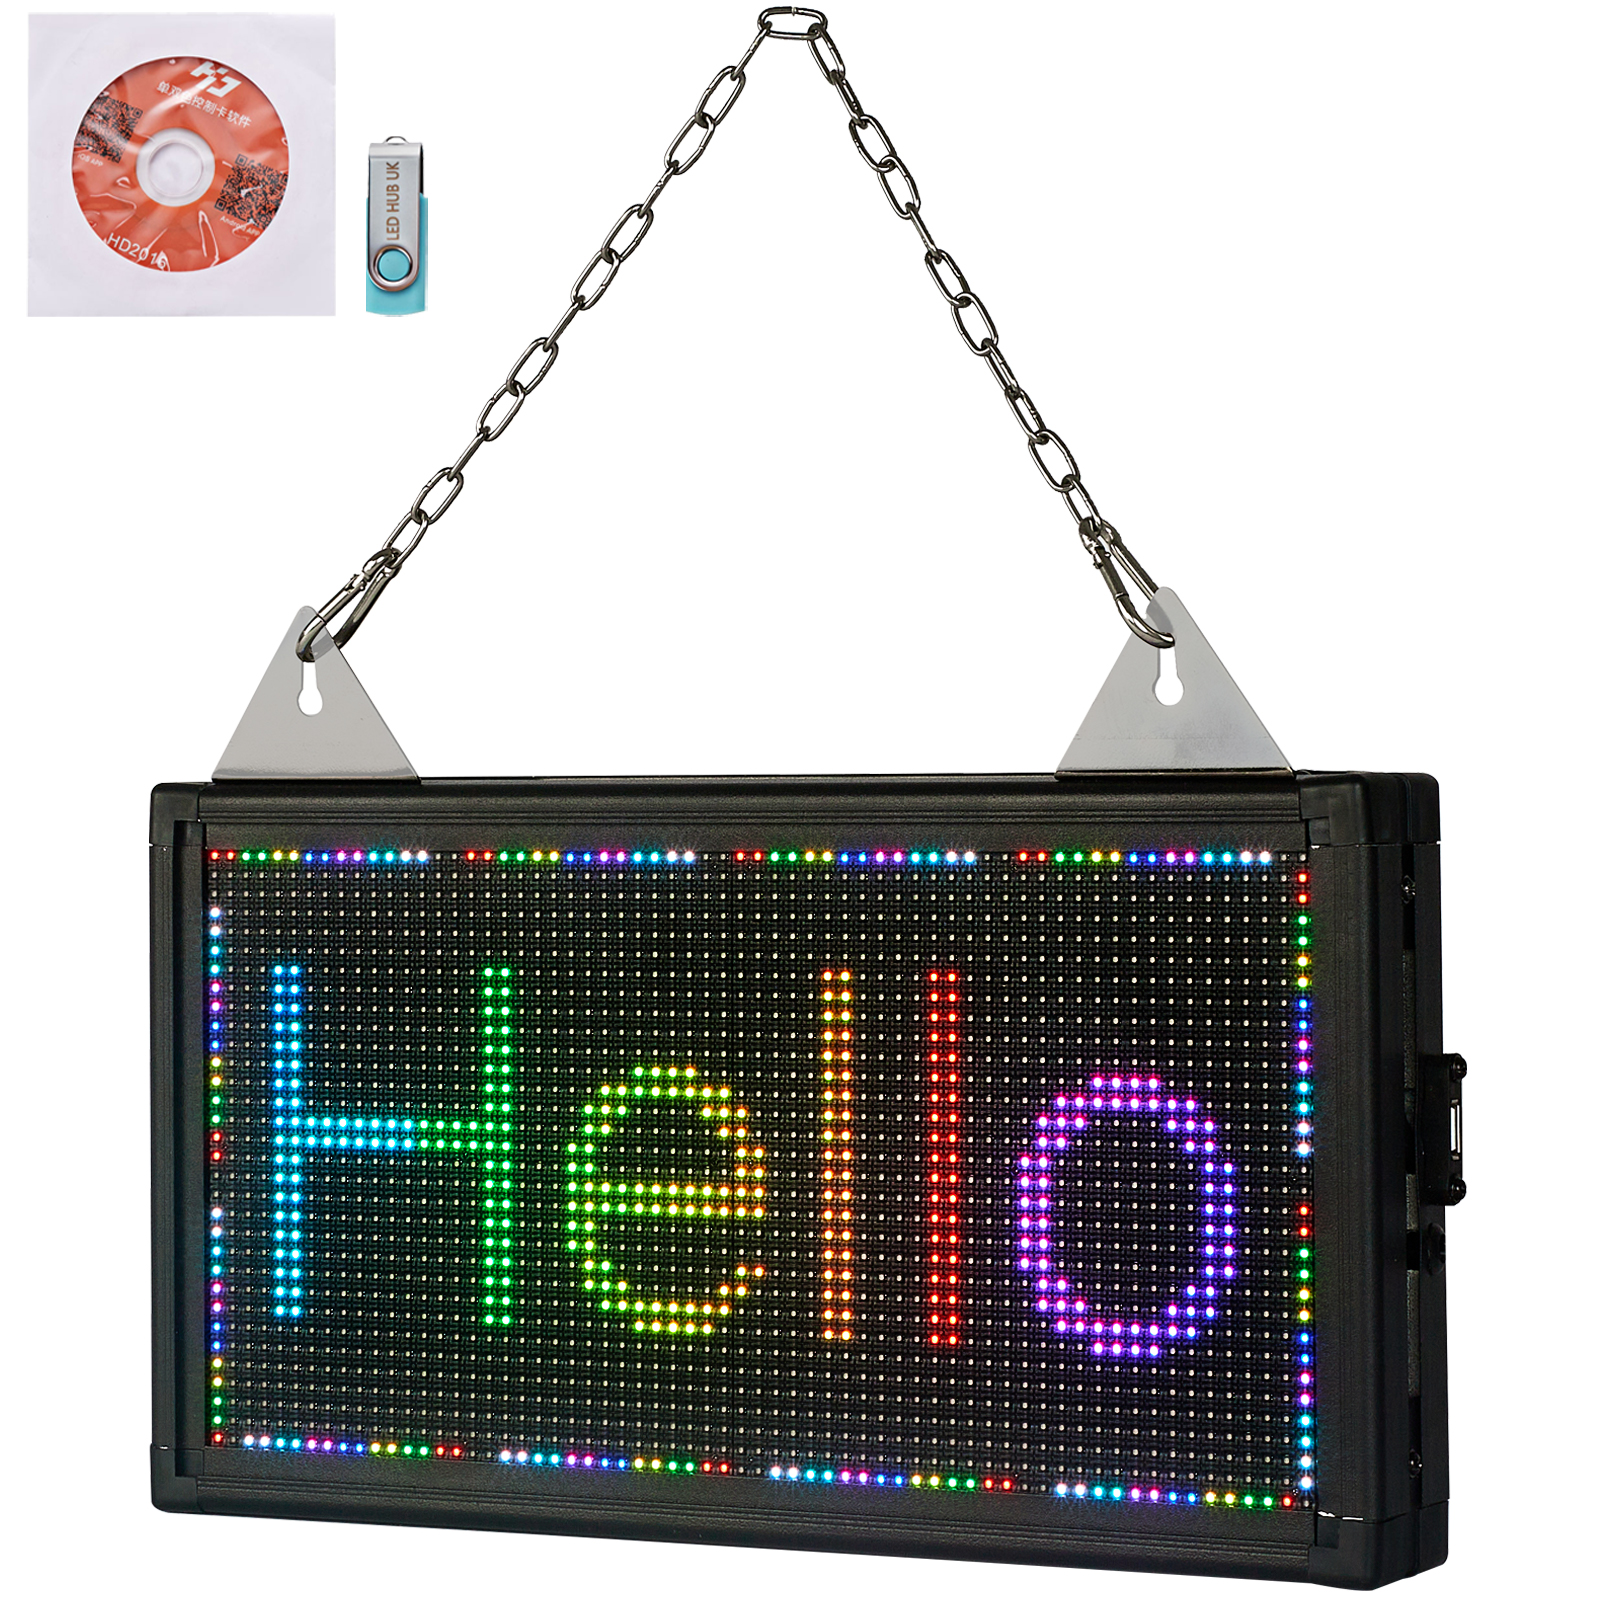 VEVOR LED Scrolling Sign, 14" x 8" WiFi  USB Control, Full Color P5  Programmable Display, Indoor High Resolution Message Board, High Brightness Electronic  Sign, Perfect Solution for Advertising VEVOR US